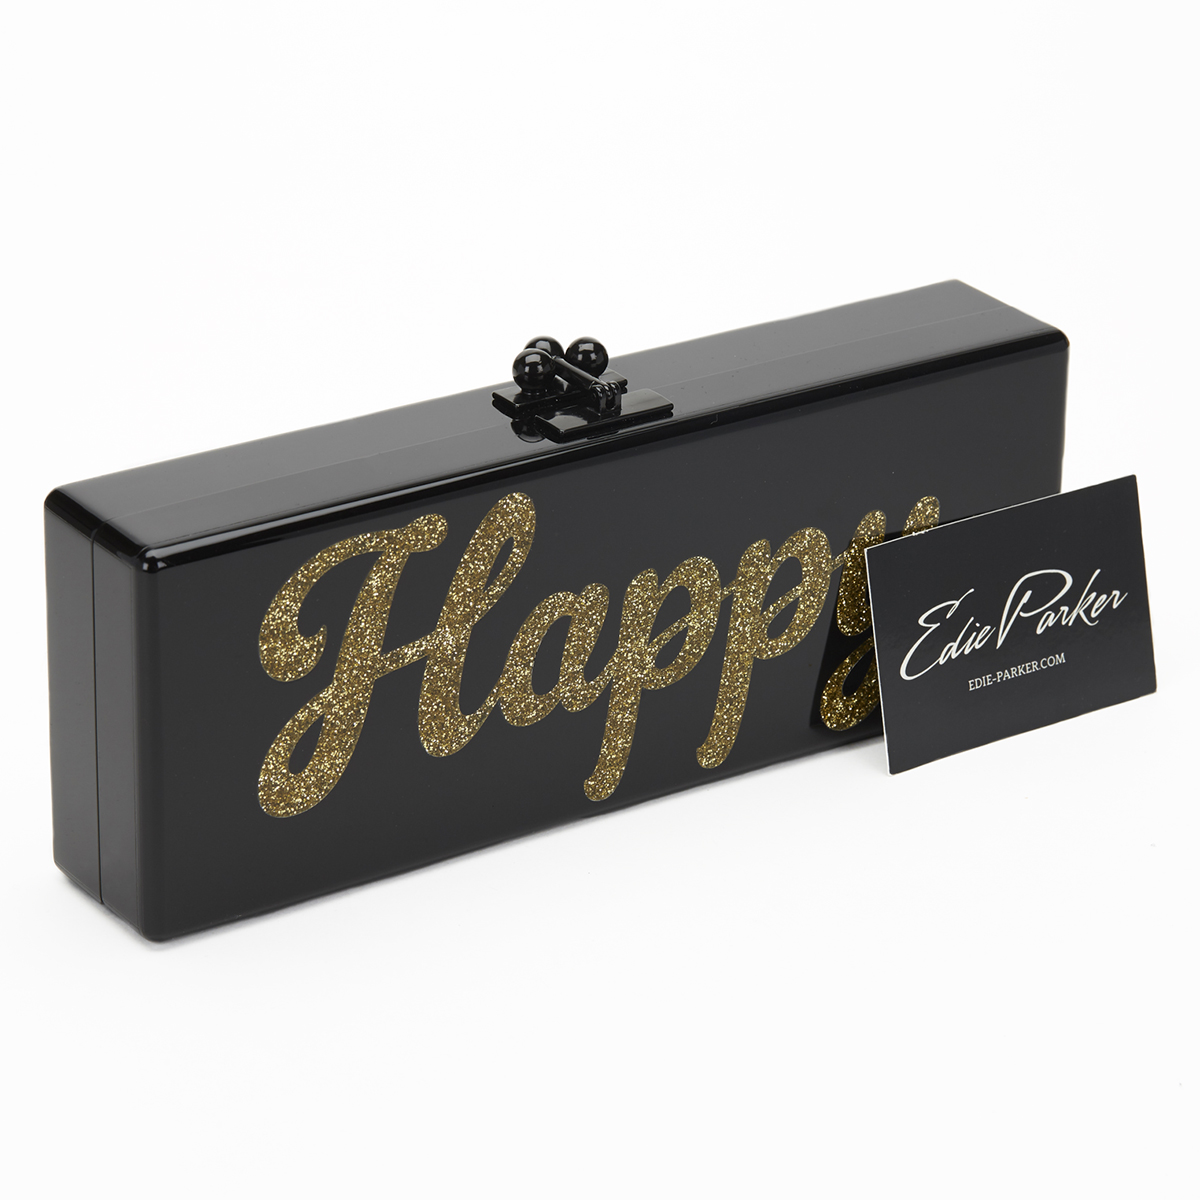 EDIE PARKER Flavia , - Black Glittered Acrylic Happy Box Clutch   TYPE Clutch SERIAL NUMBER _ YEAR - Image 9 of 9